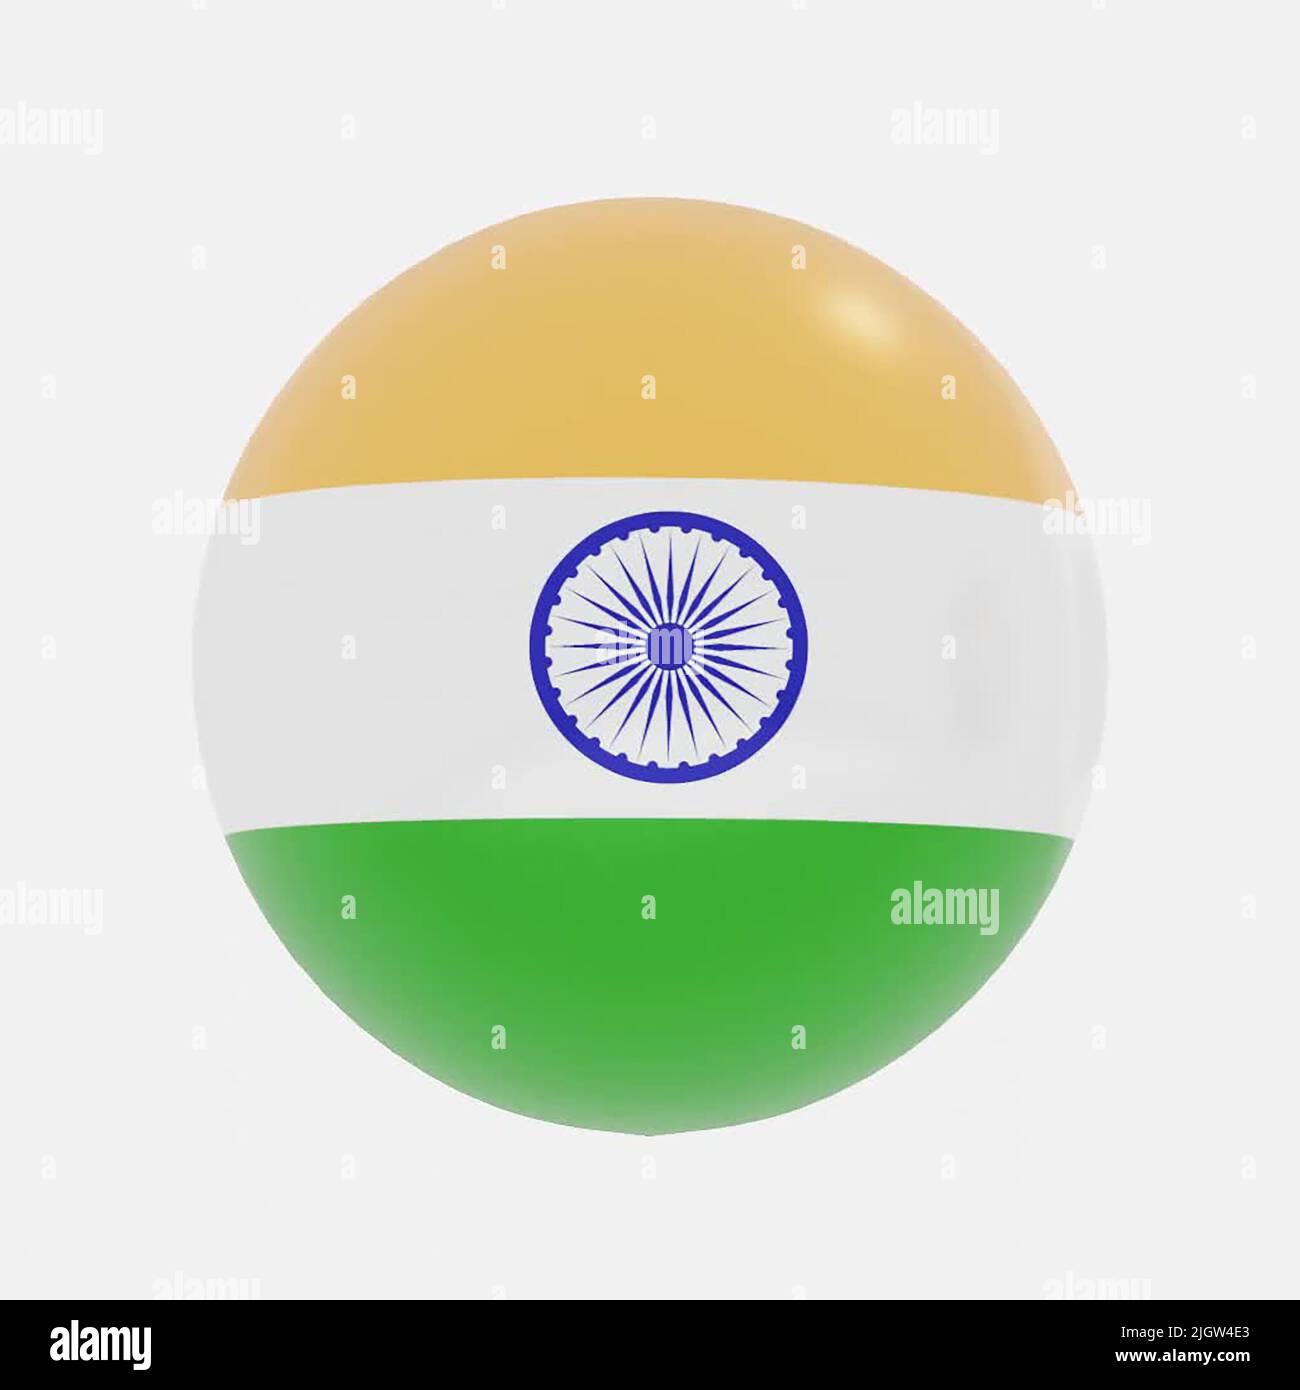 3d render of globe in India countries flag for icon or symbol. Stock Photo